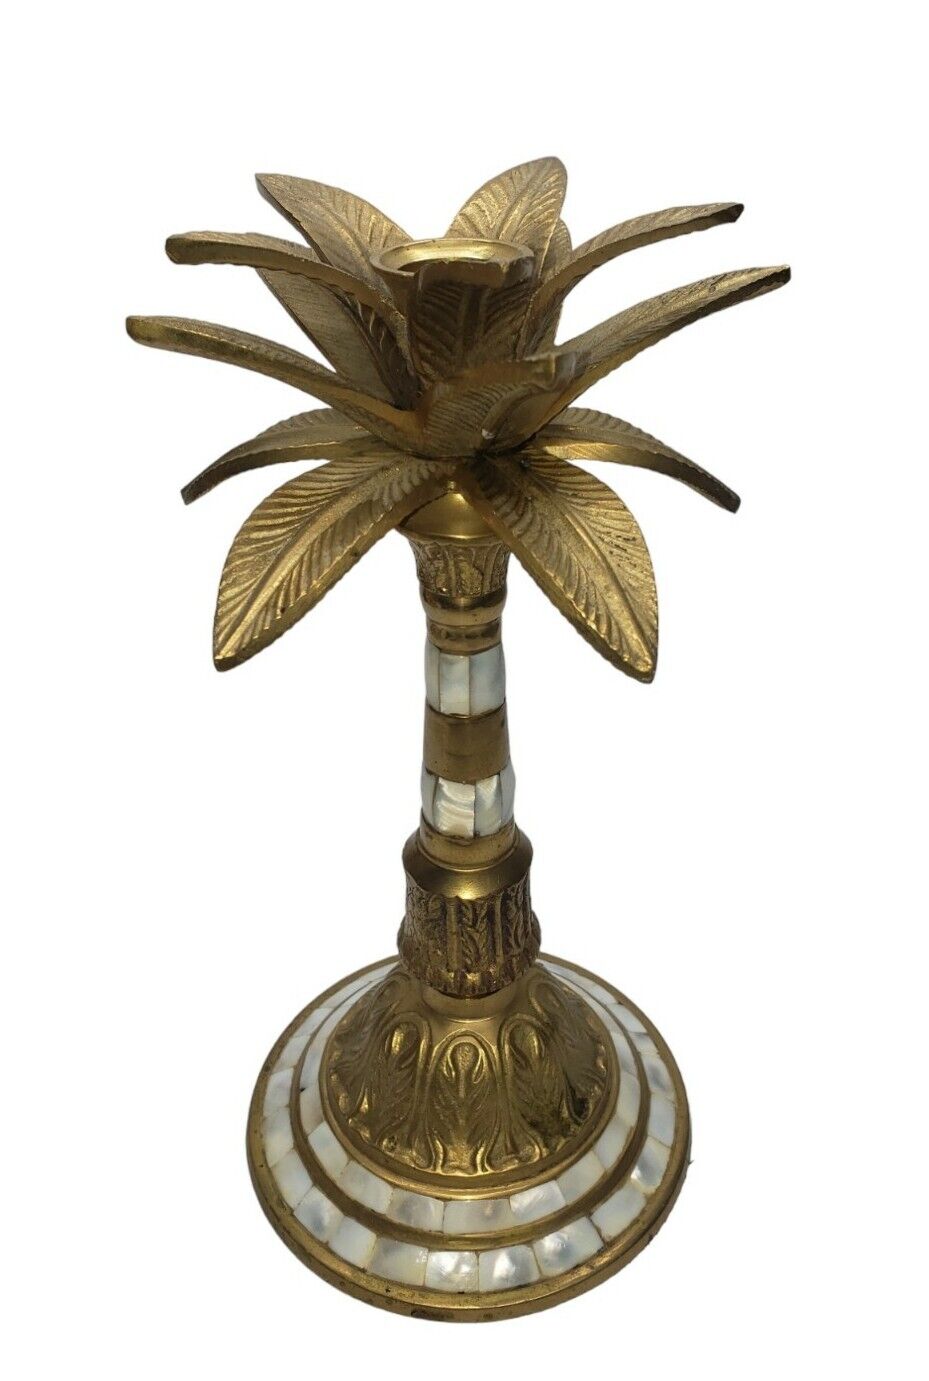 Vintage Solid Brass Candleholder Palm Tree With Mother Of Pearl Inlay